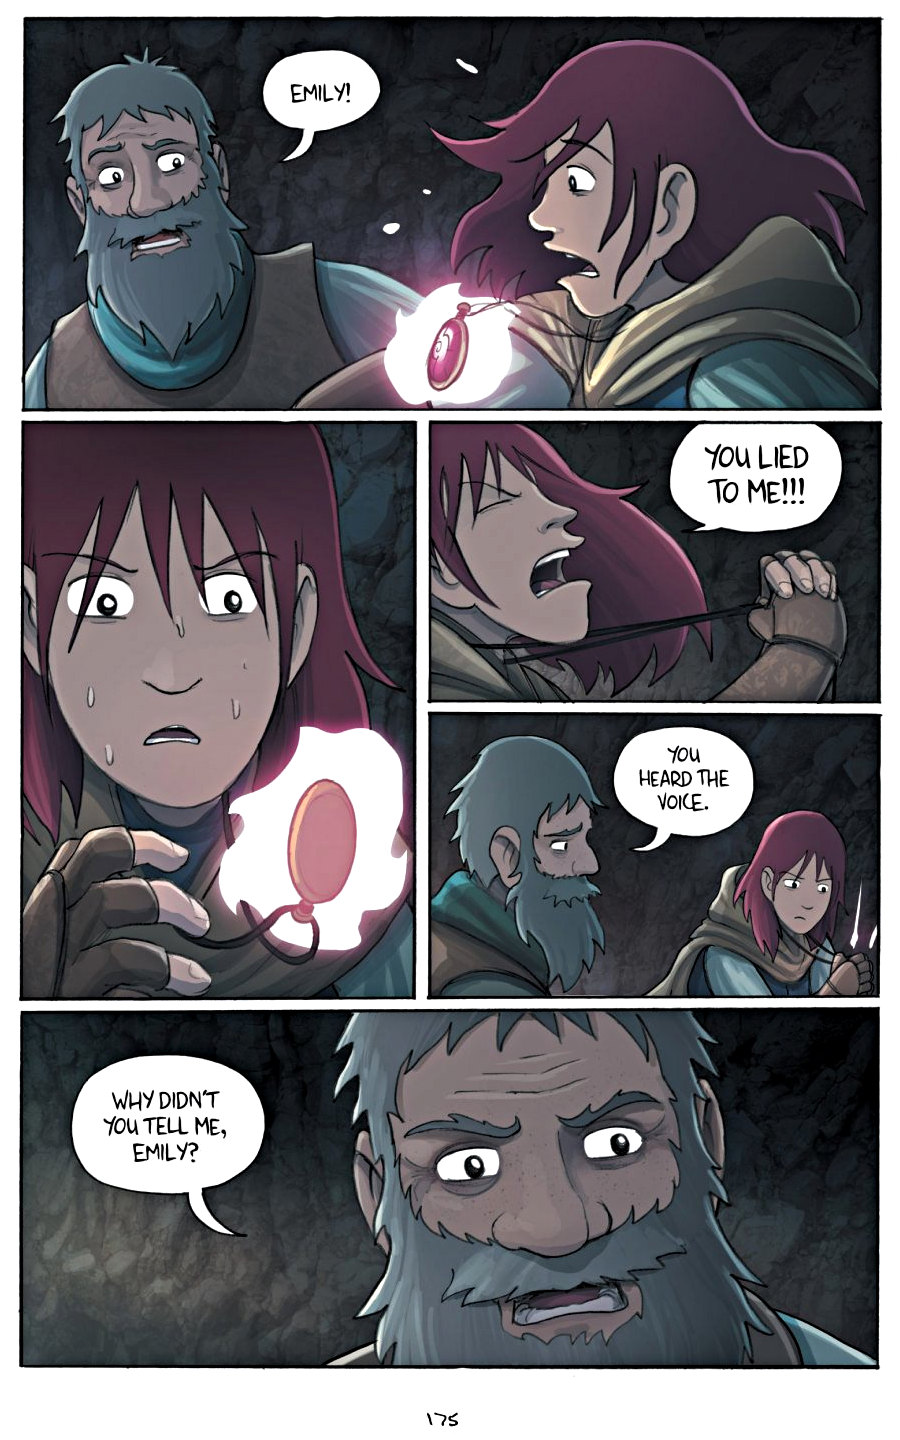 page 175 of amulet 5 prince of the elves graphic novel